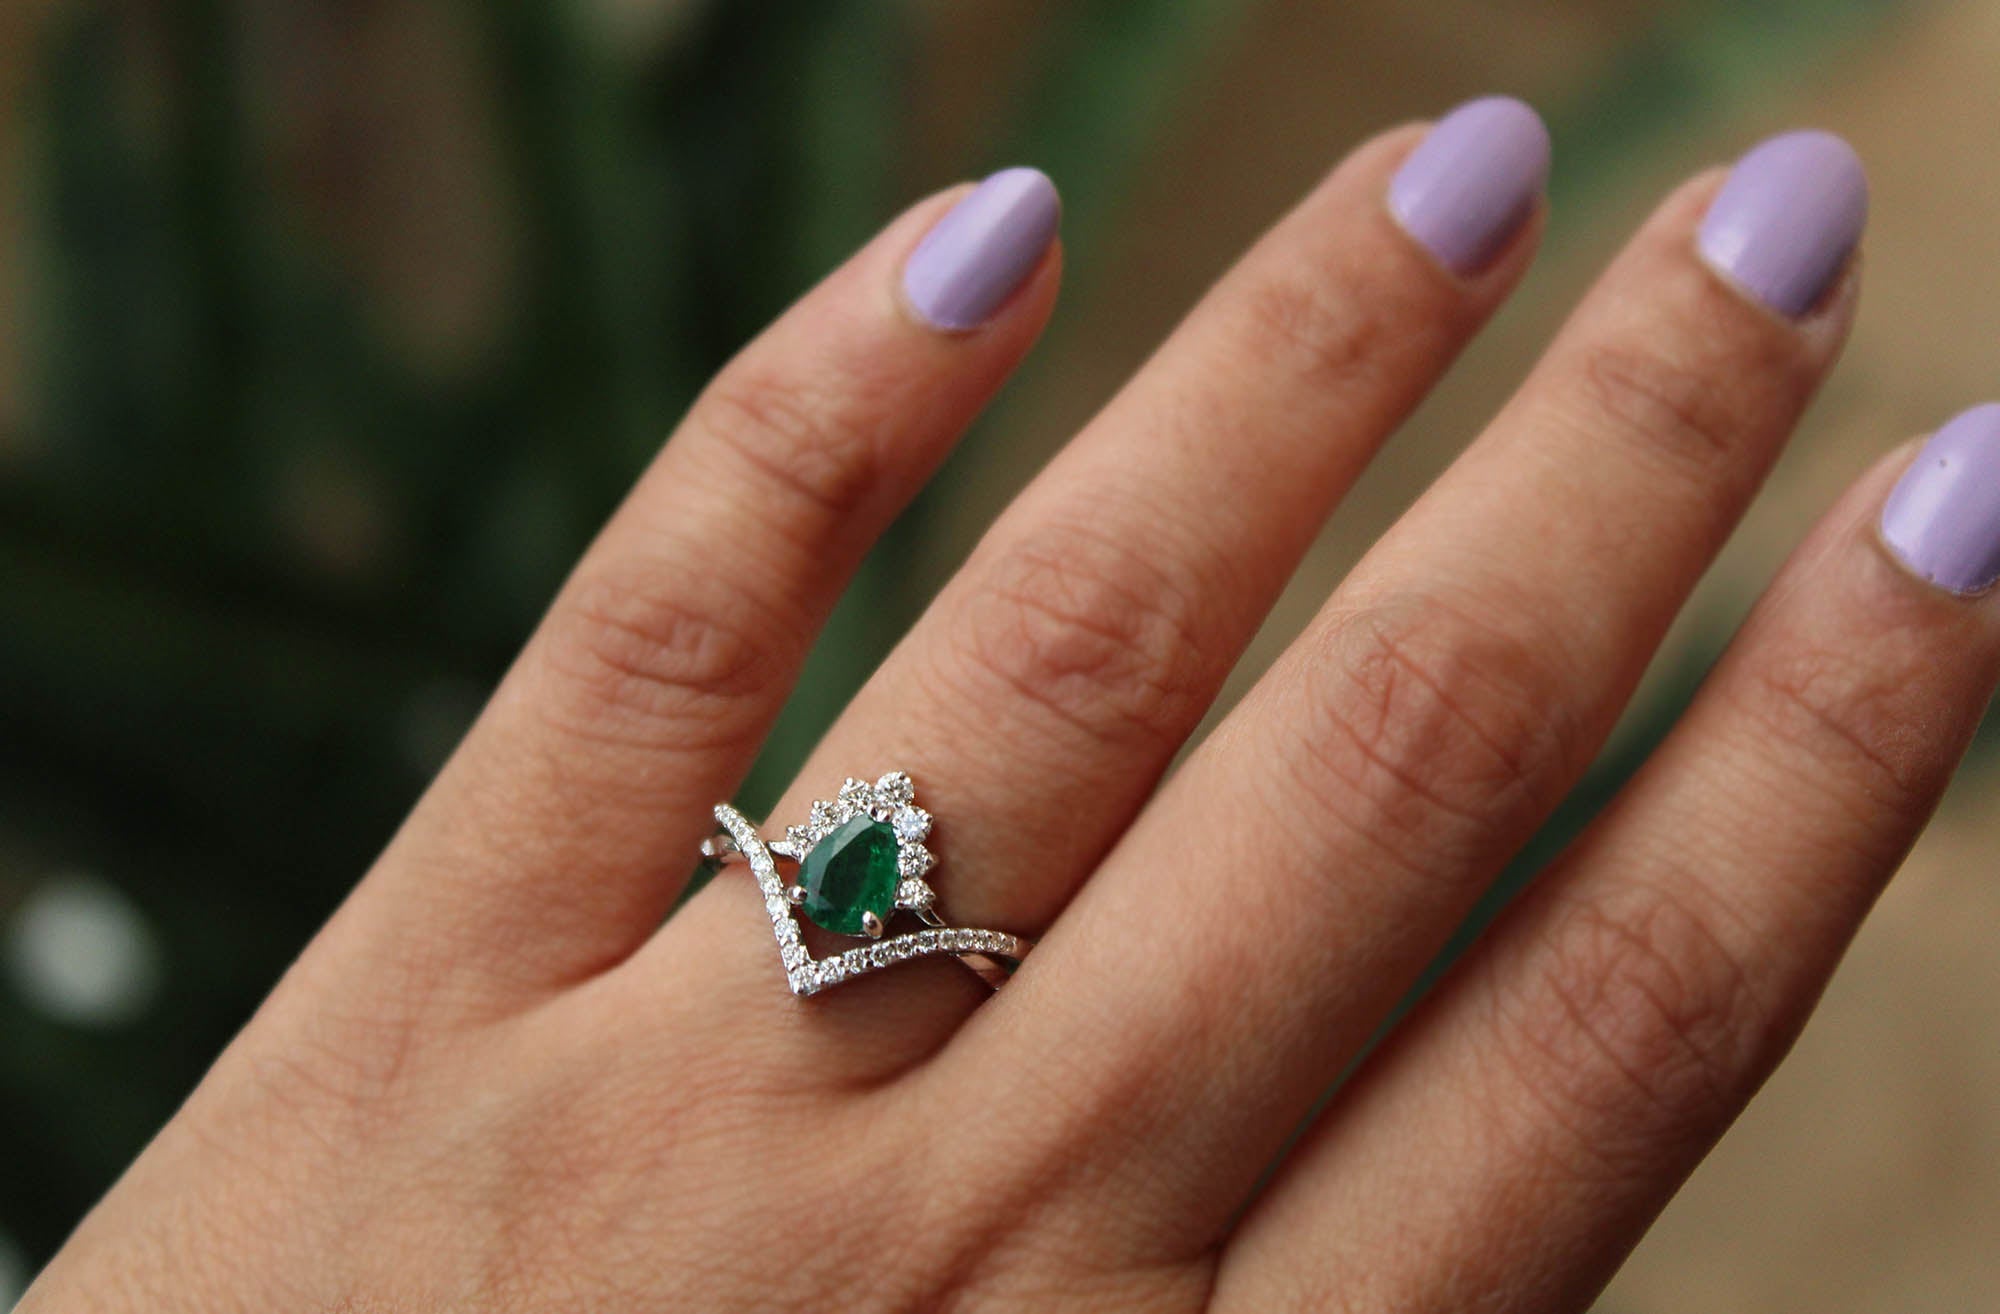 Effinny 8.0ct Gorgeous Emerald Green Engagement Ring for Women,925 Sterling  Silver Paraiba Tourmaline Cushion Cut Halo Promise Ring | Amazon.com